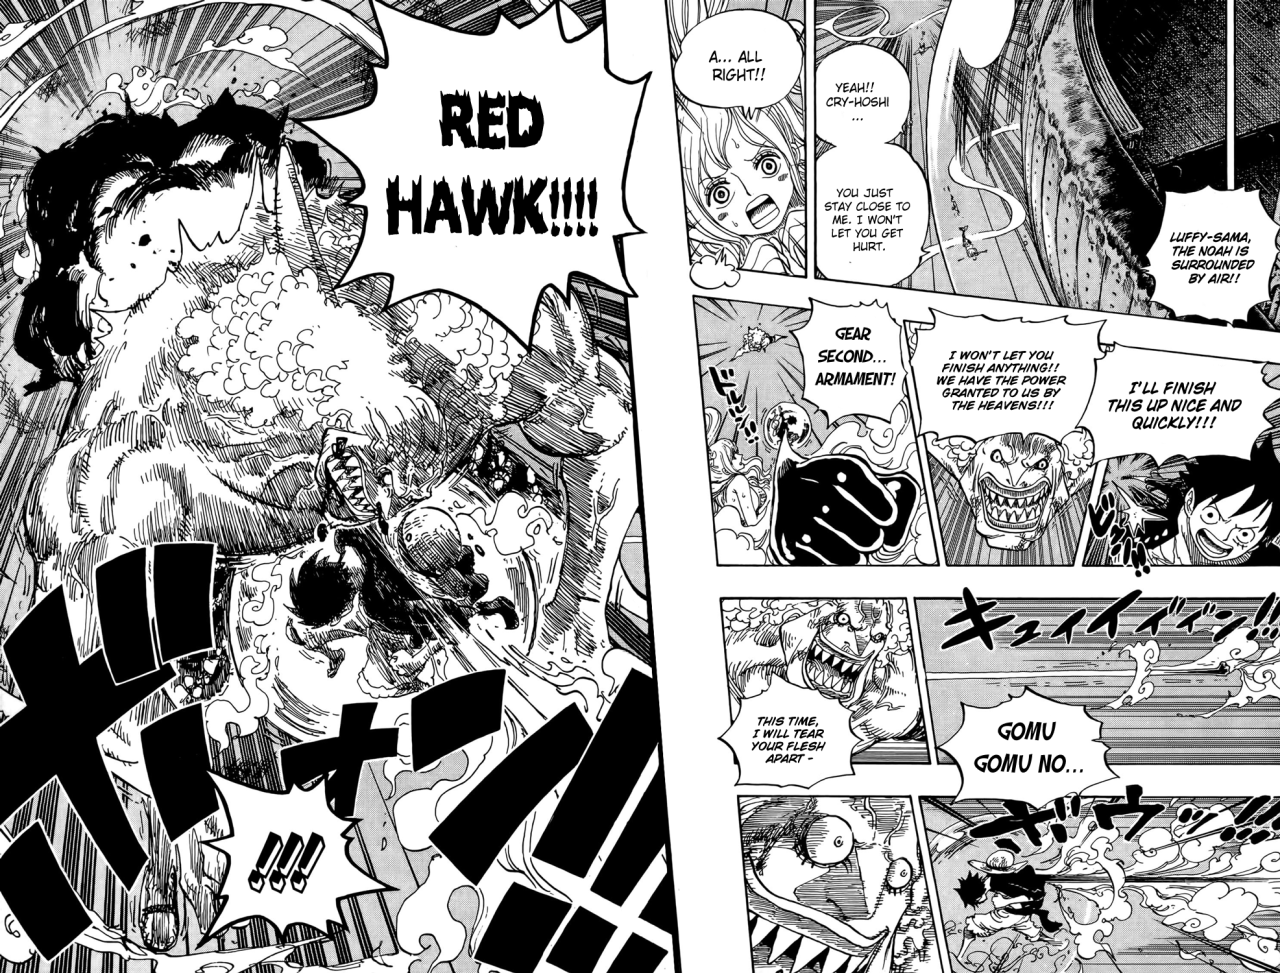 Queen Of The Damned When Luffy Discovered Red Hawk He Addressed It As